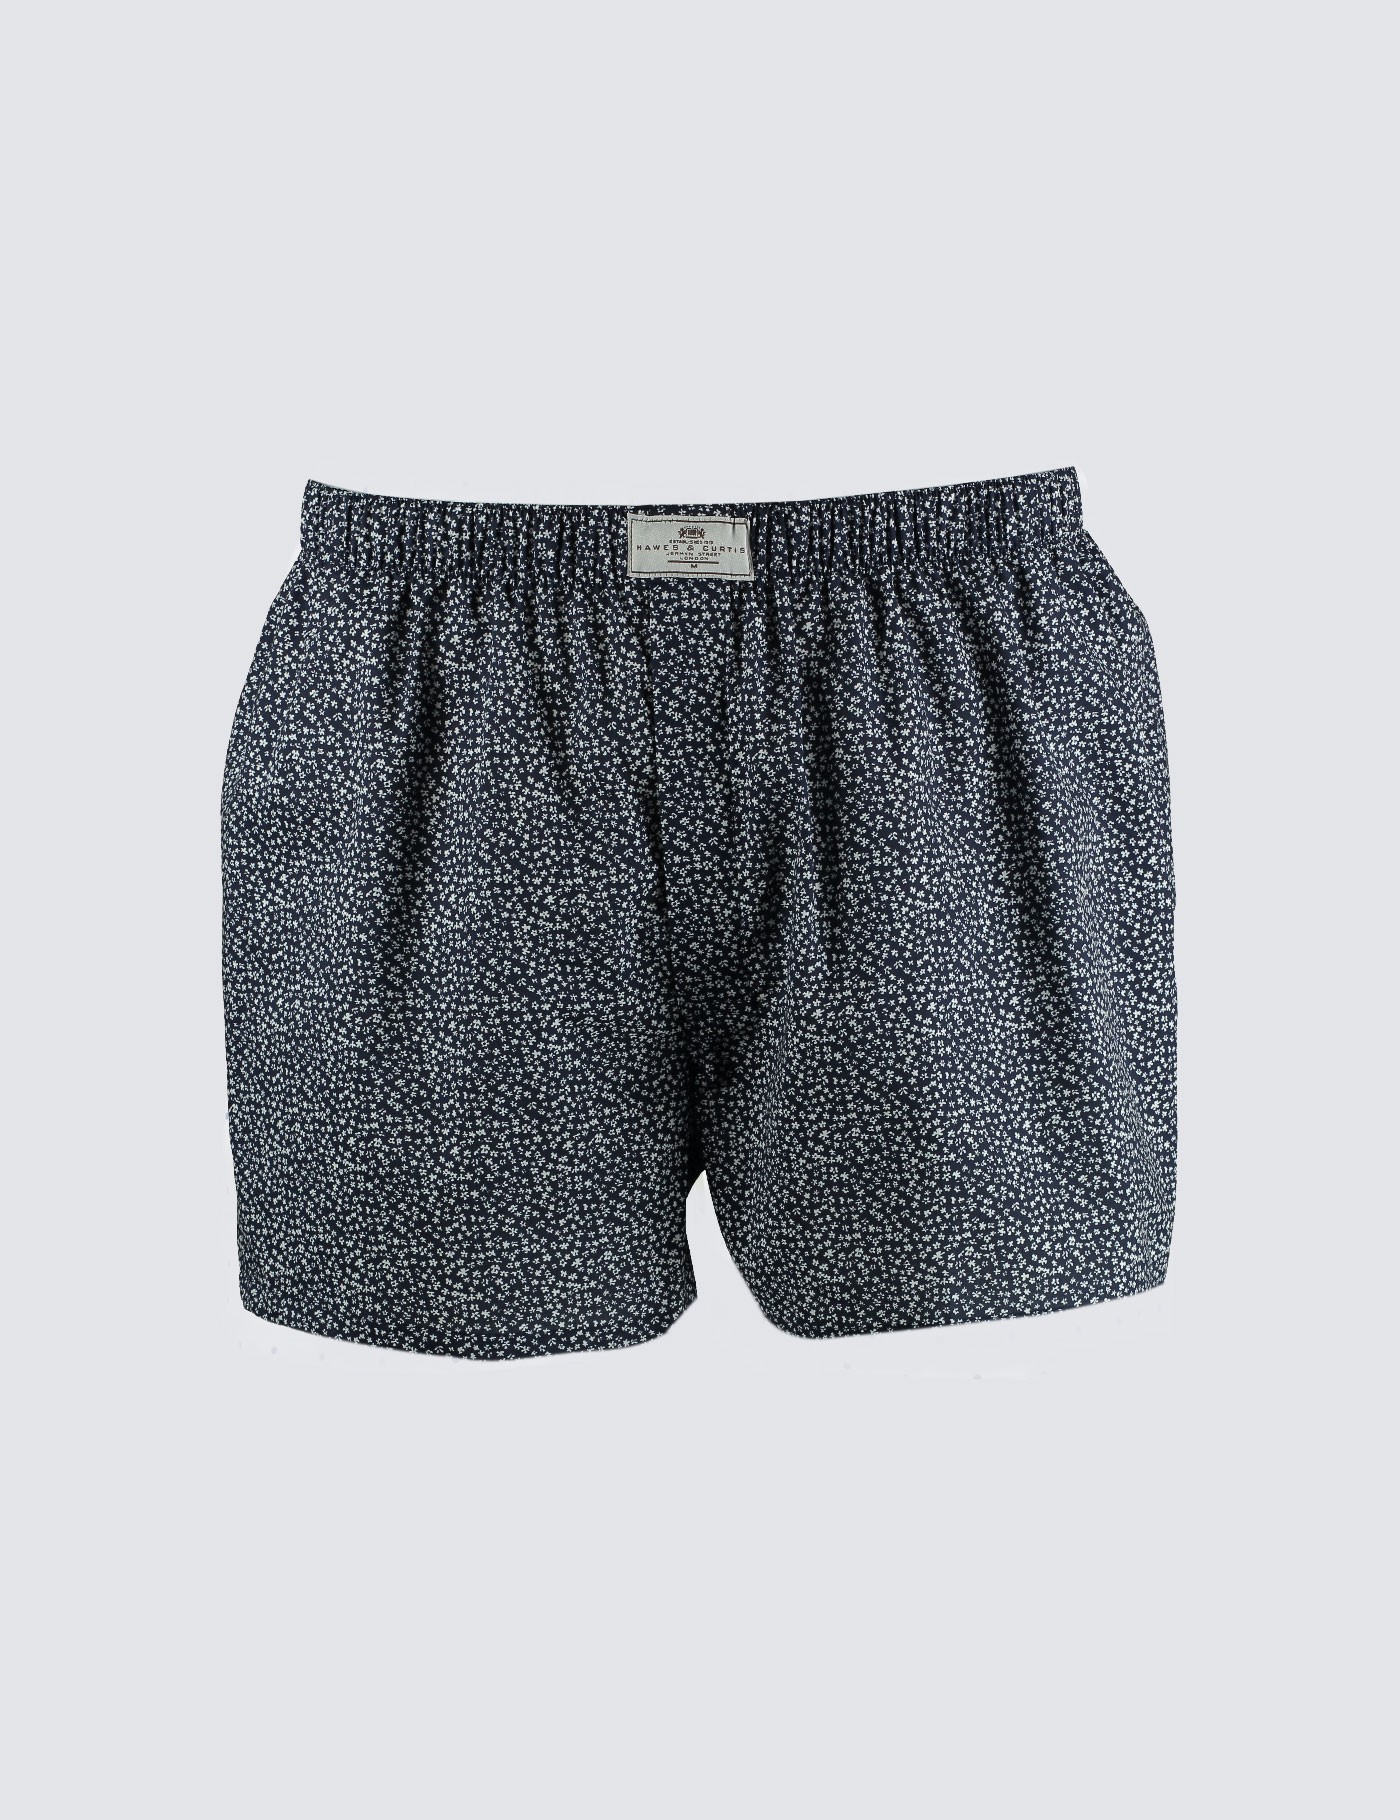 Men's Navy & White Ditsy Floral Cotton Boxer Shorts | Hawes & Curtis